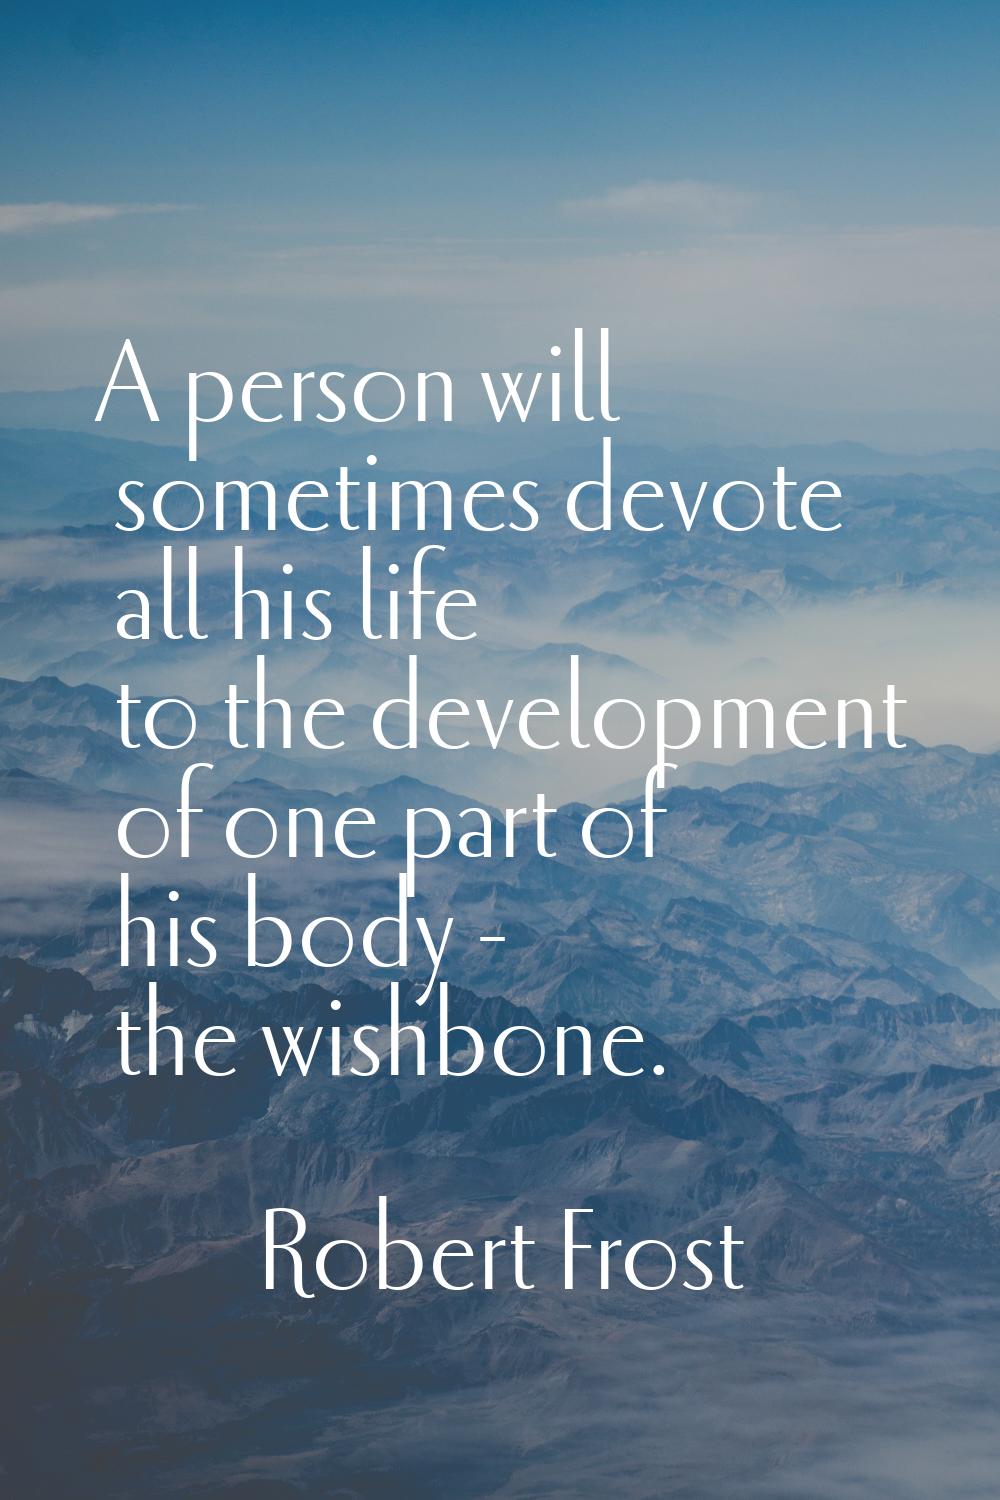 A person will sometimes devote all his life to the development of one part of his body - the wishbo